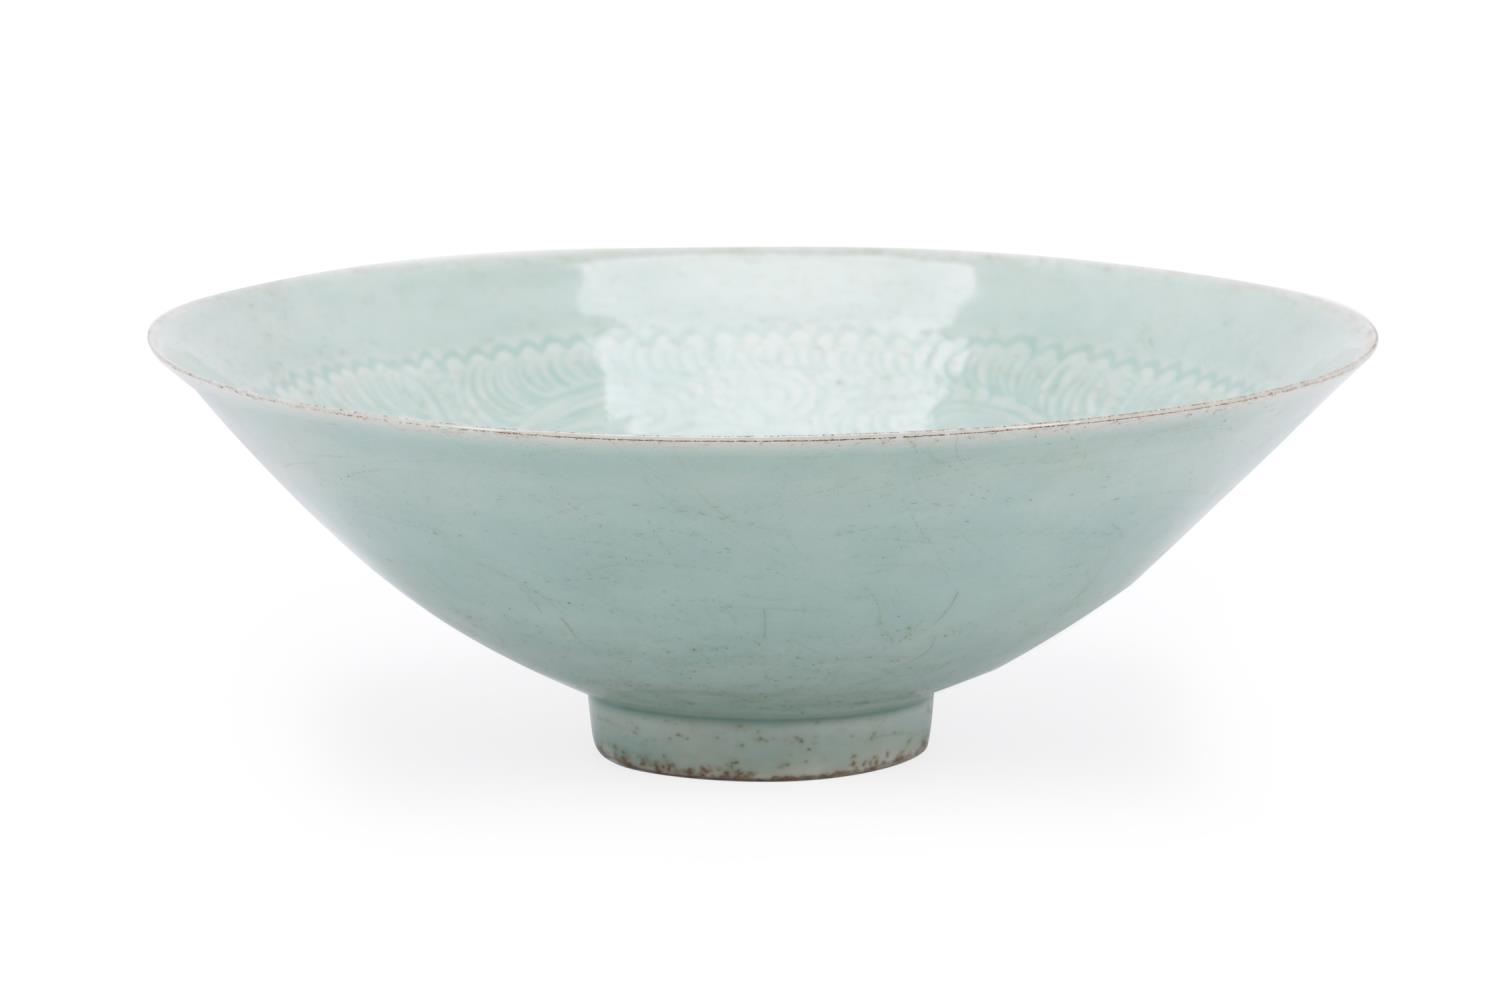 CHINESE LONGQUAN STYLE CELADON